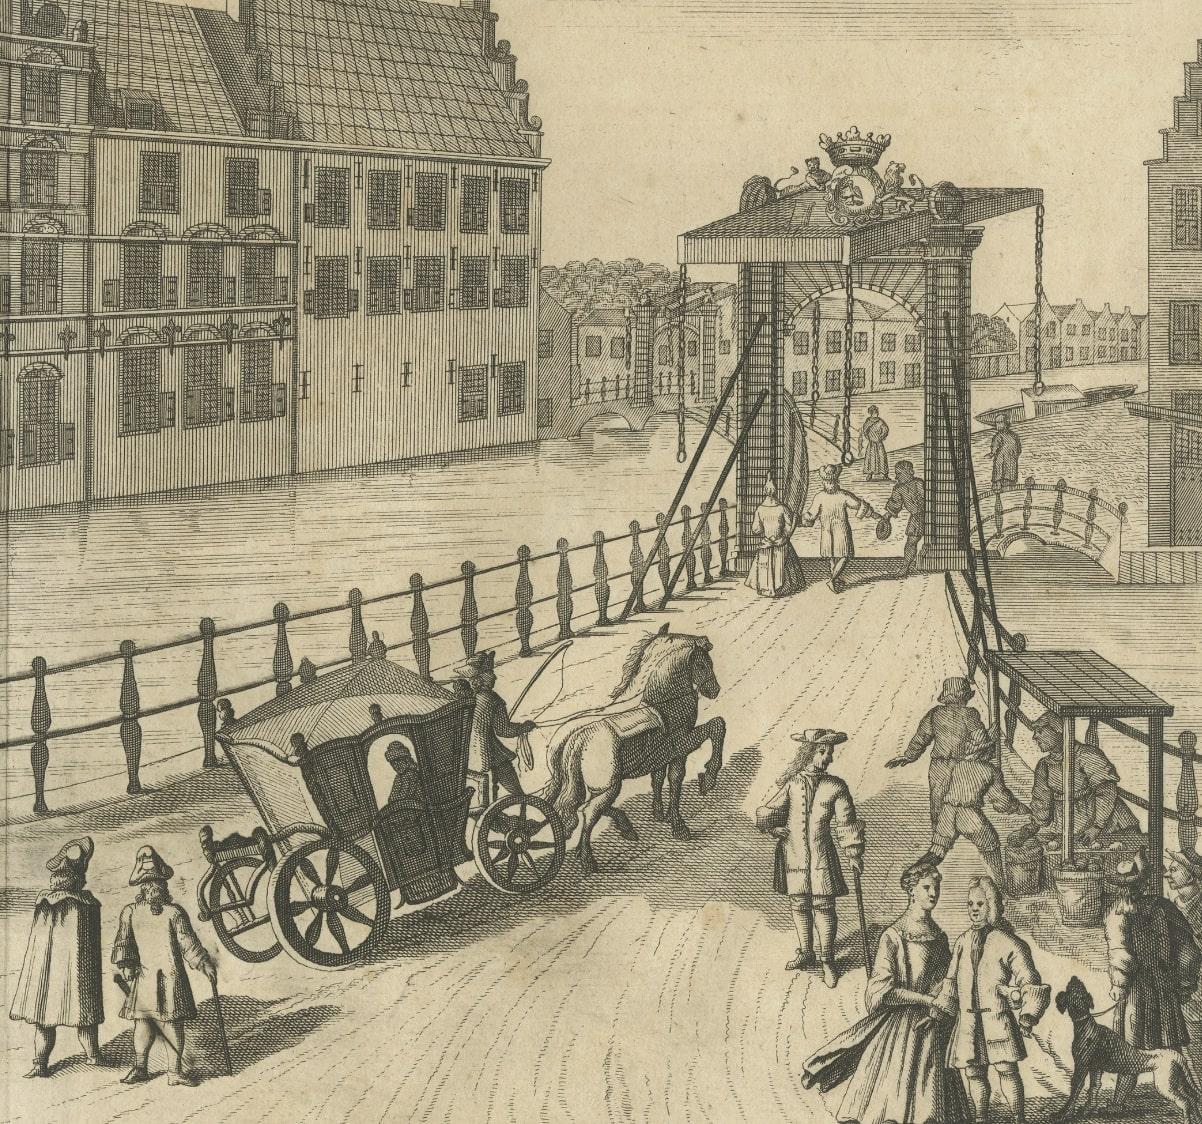 Antique print titled 't Arm-Huis van de Diakonie'. View of the Old Parish Women and Children's Home, located on the Spui in the Hague. On the street several figures, a stall and a koets. Published by R. Boitet, circa 1735.